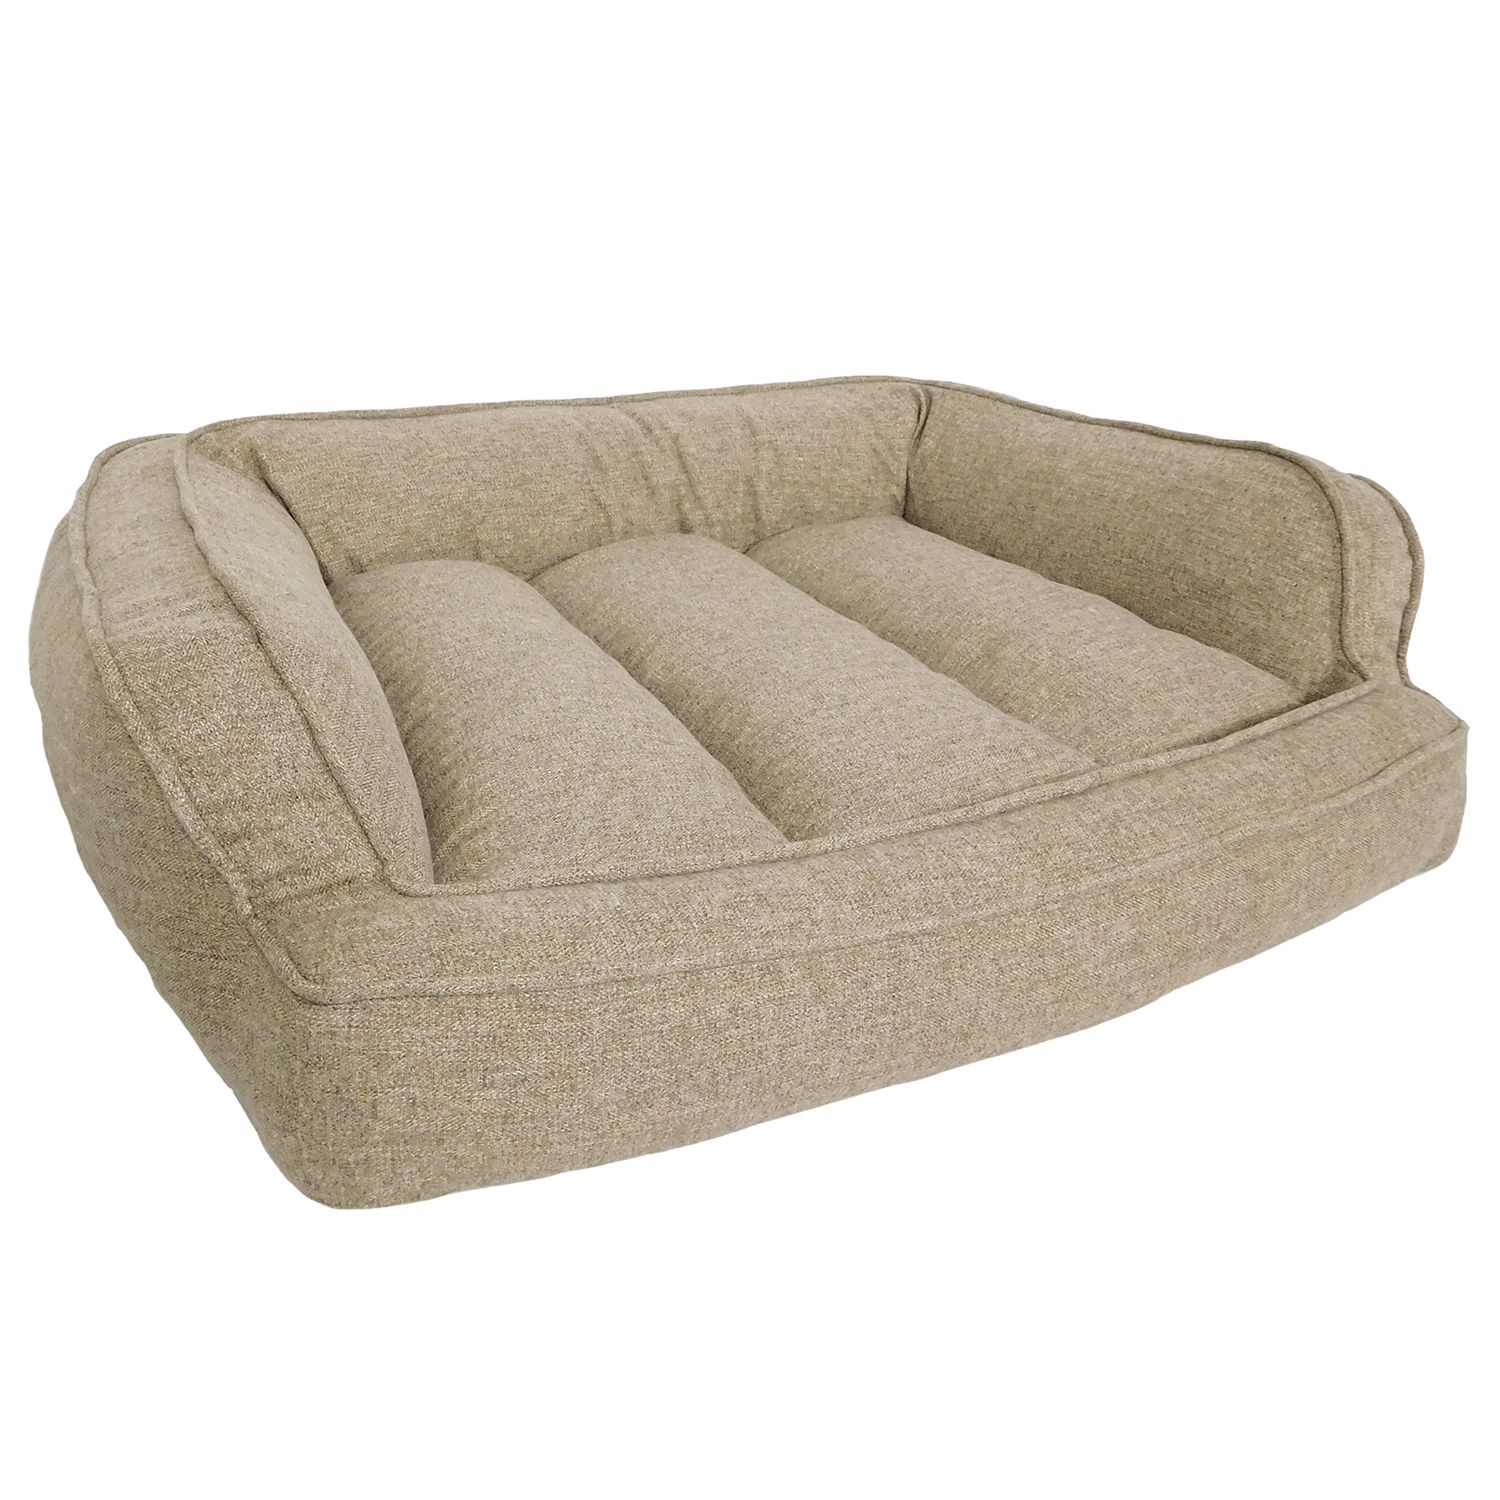 pet bed for your couch